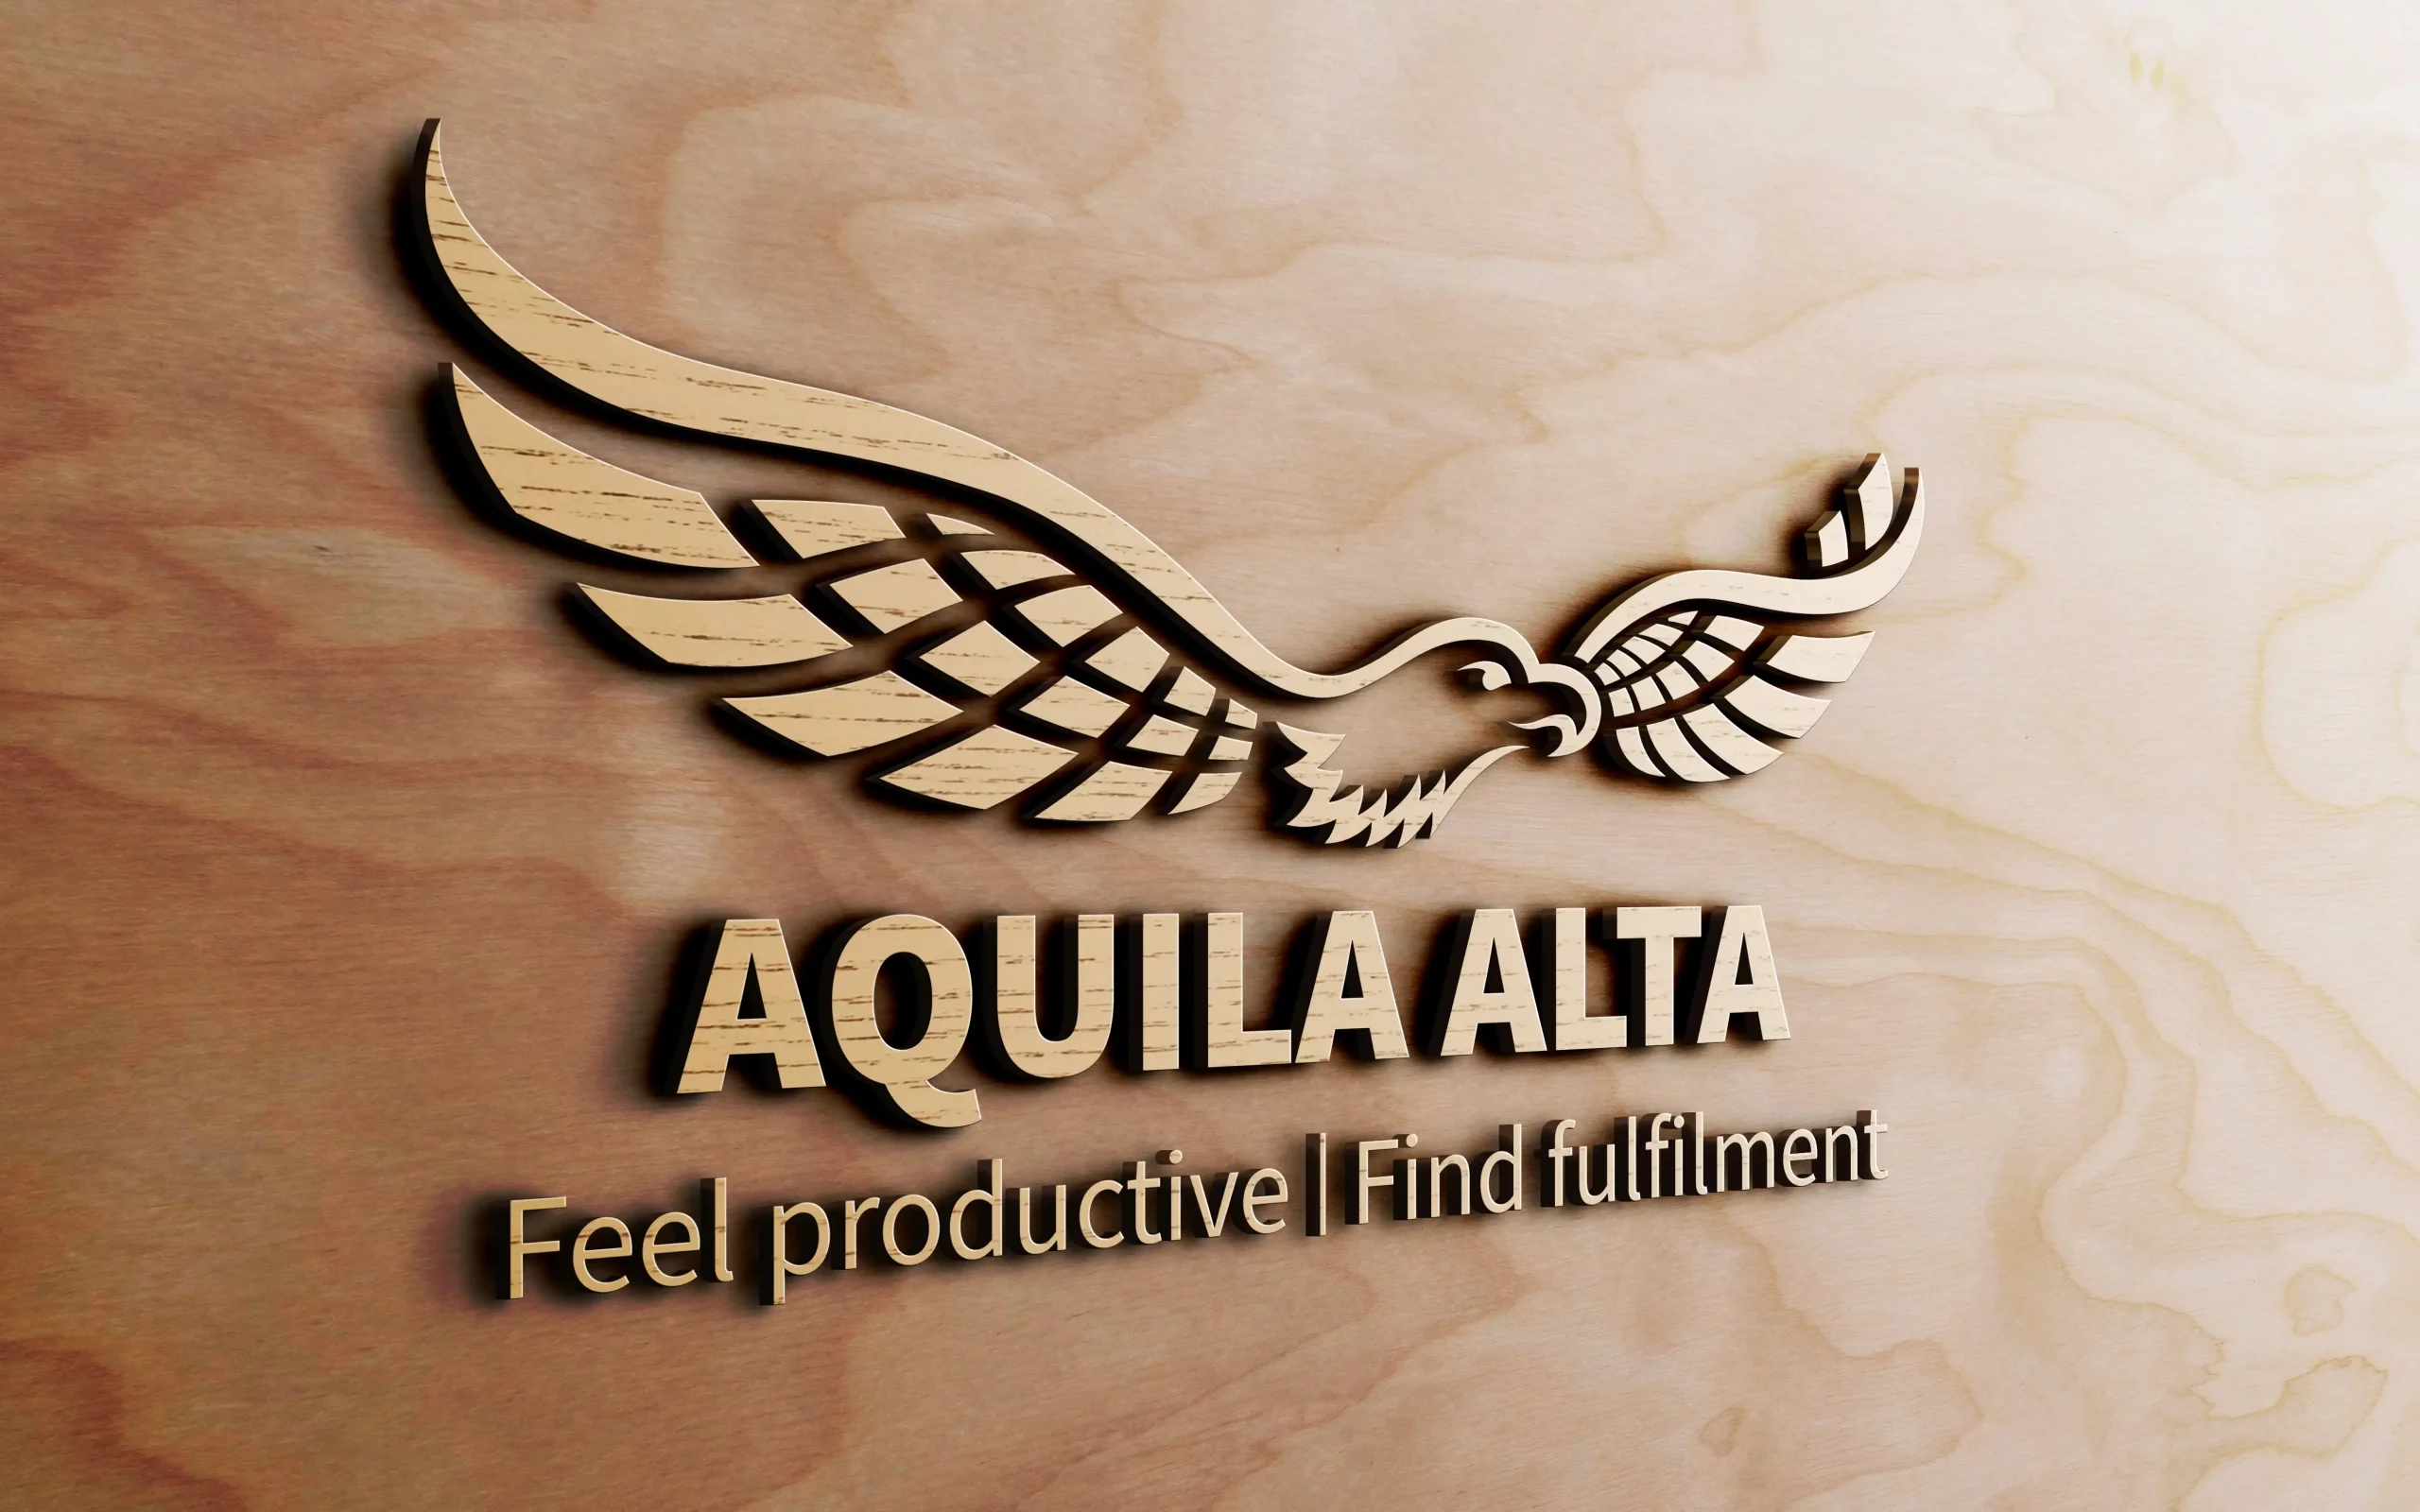 Logo Making made easy for Aquila Alta in Christchurch. An international Corporate Business Logo Design made by XDC.NZ, the super experienced professional Logo Maker based in Christchurch. Call Clint now on 021 11 44 014